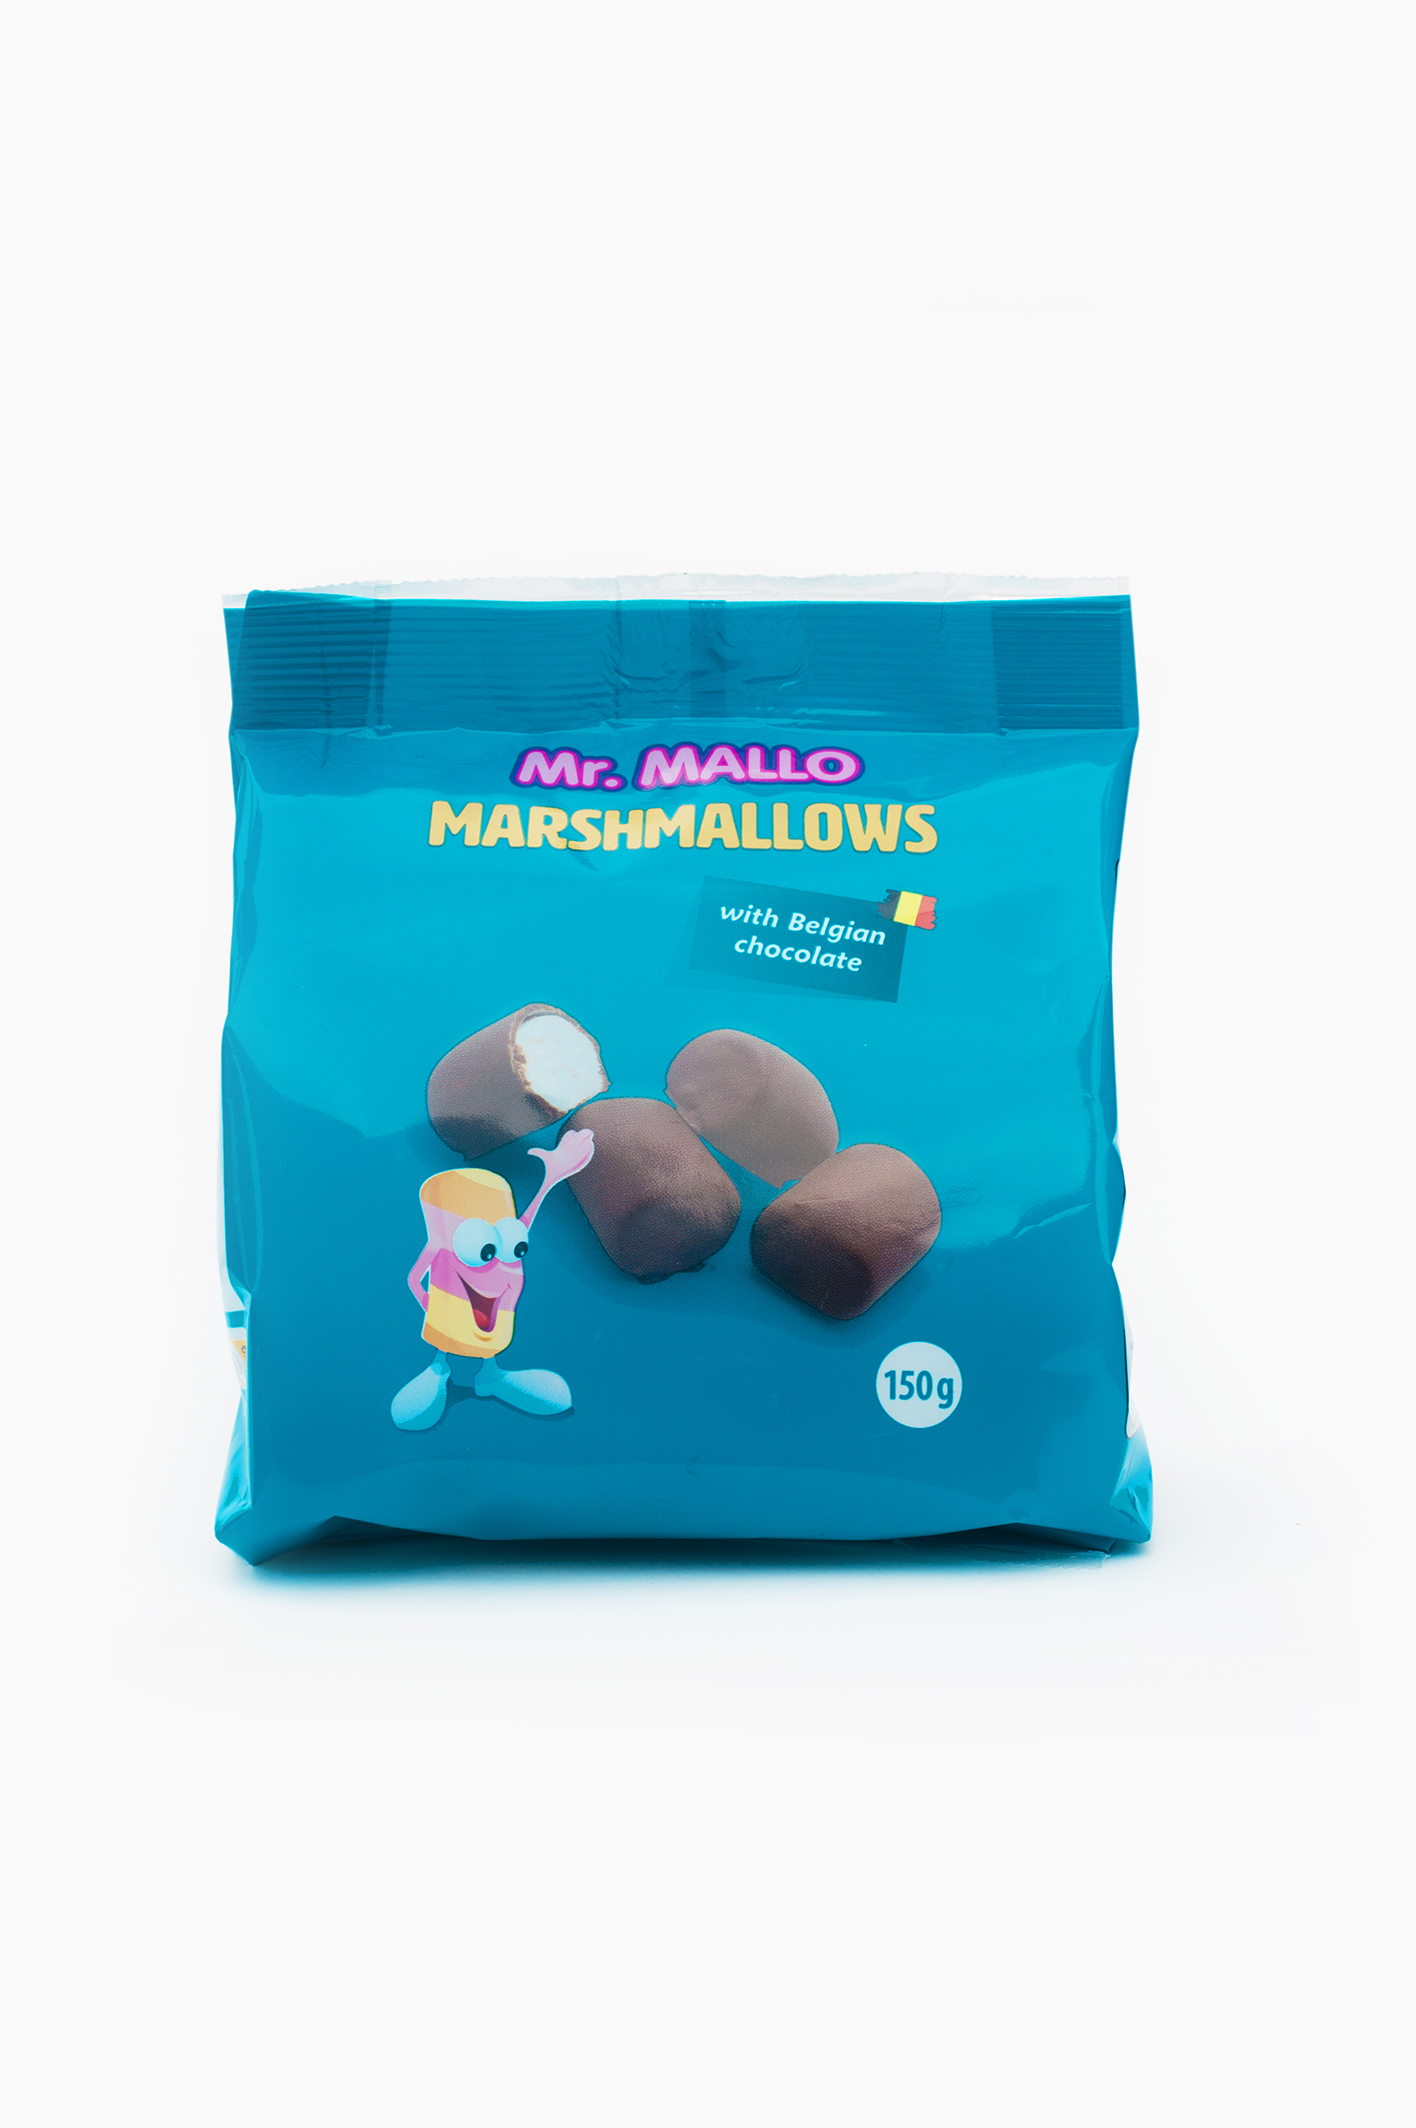 Mr. Mallo Real Belgian chocolate stand-up bag 150g